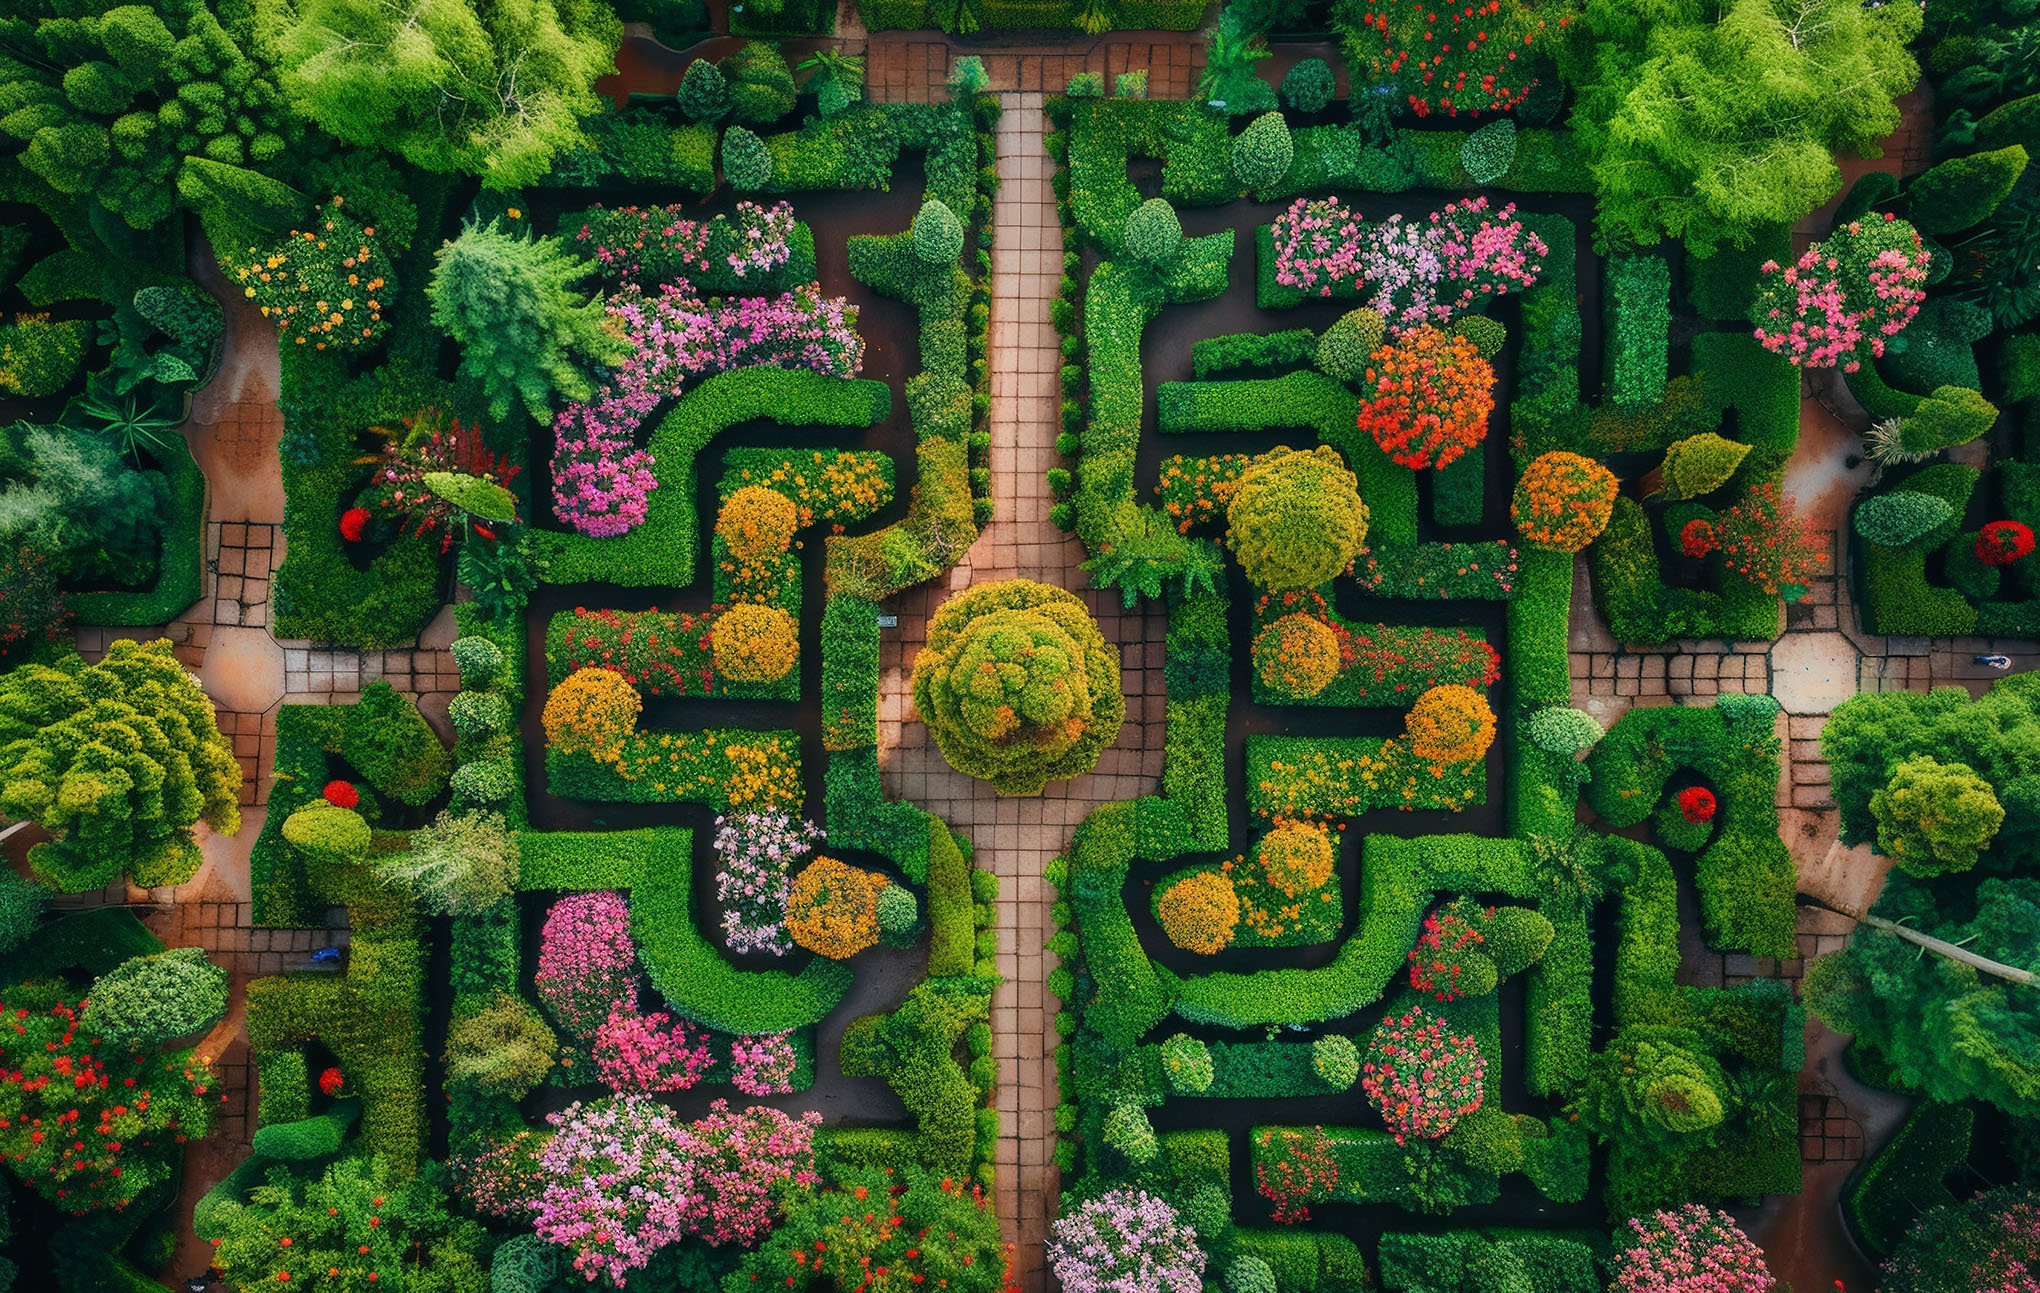 Aerial view of a lush garden maze with intricate paths and a variety of colorful flowers and manicured shrubs, centered around a circular design with a garden bench.